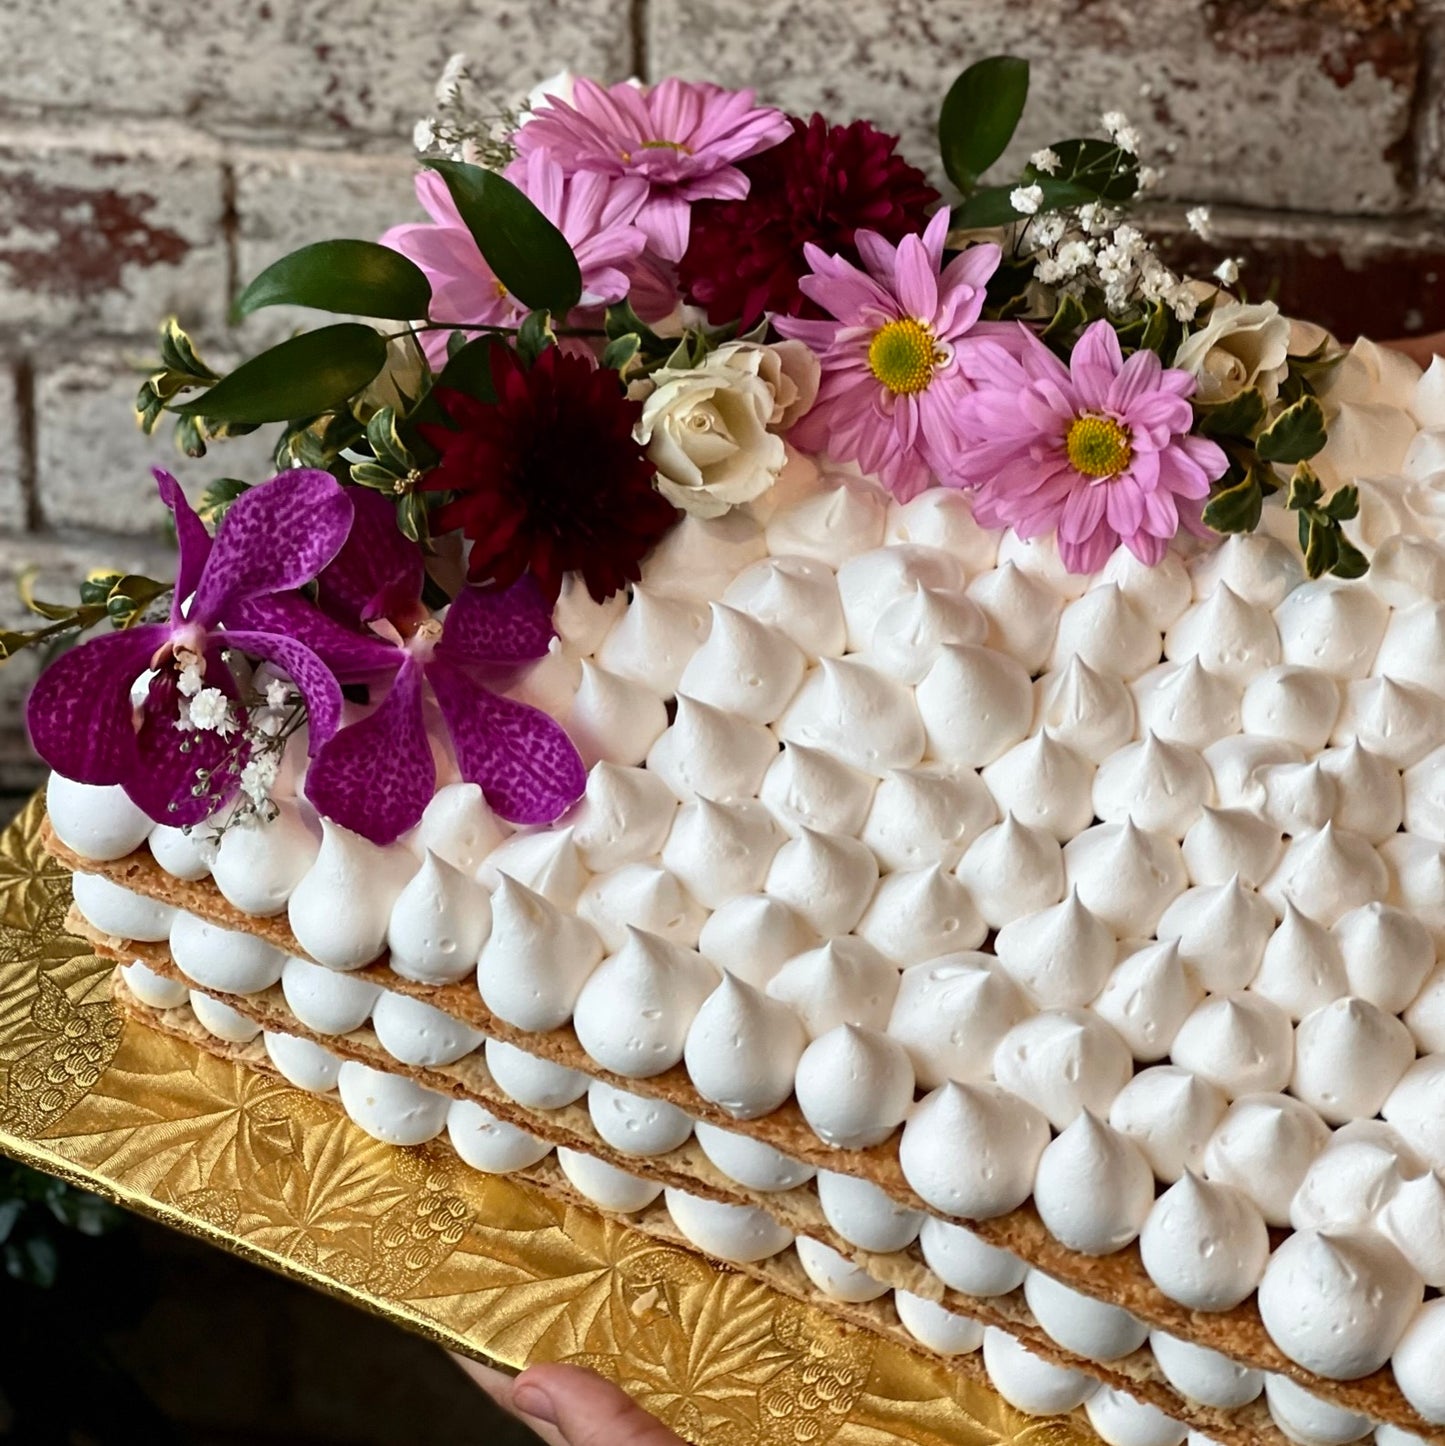 Sheet cake with dollops of fresh flowers